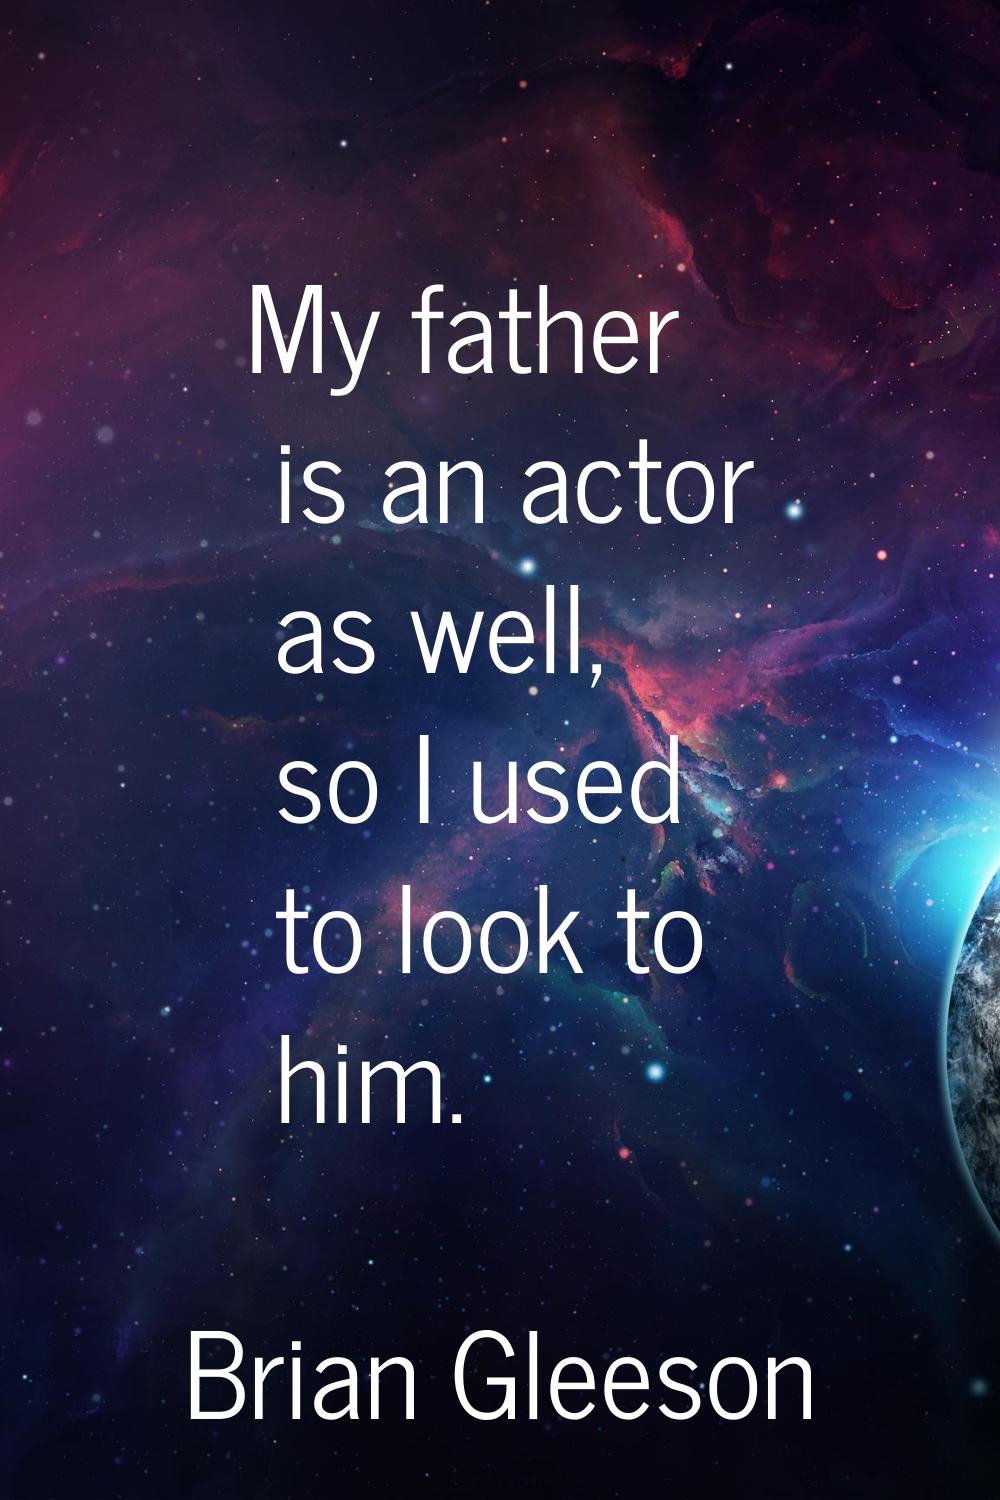 My father is an actor as well, so I used to look to him.